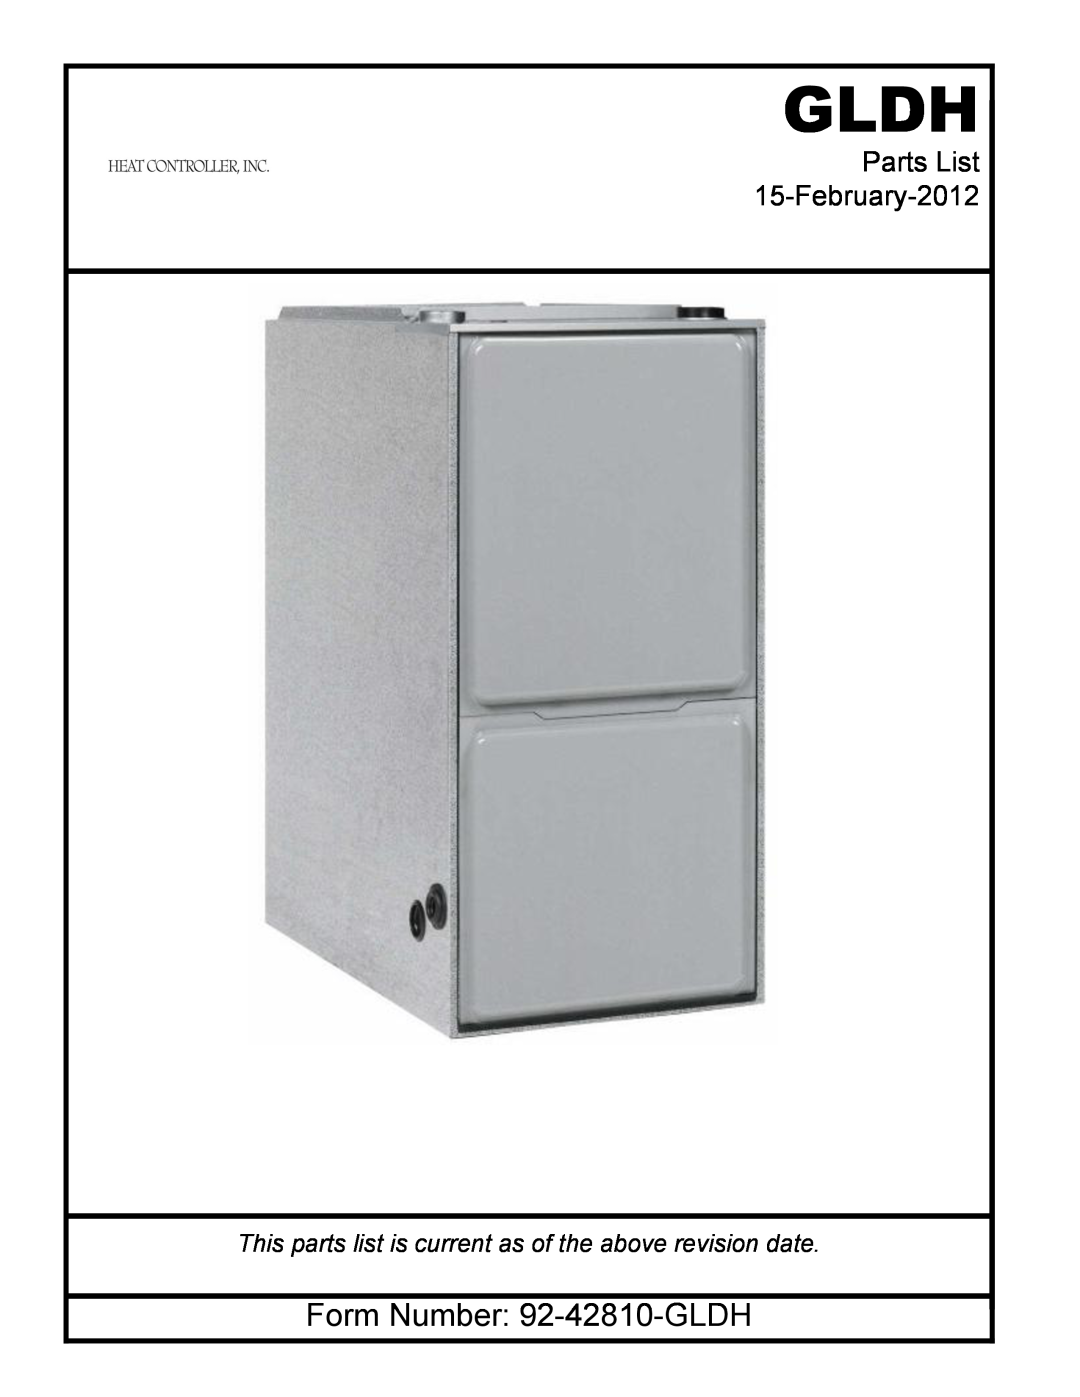 Heat Controller manual Gldh, Form Number 92-42810-GLDH, Parts List 15-February-2012 